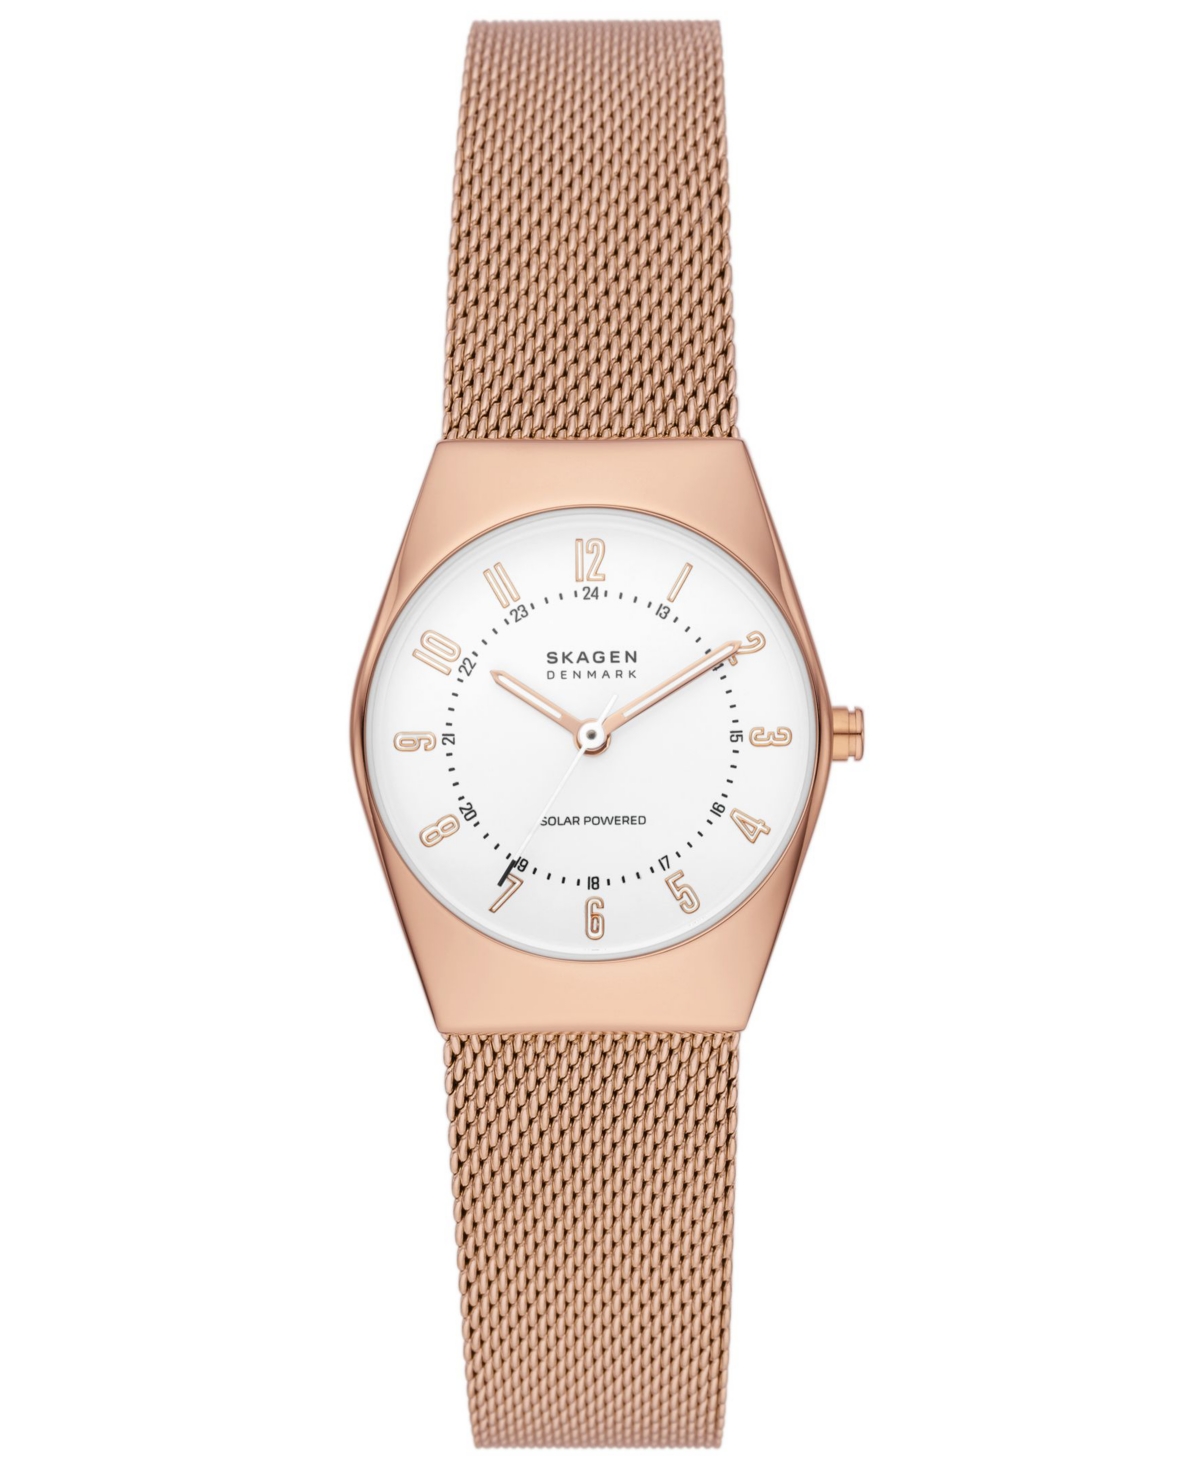 Women's Grenen Lille Solar-Powered Three Hand Rose Gold-Tone Stainless Steel Watch, 26mm - Rose Gold